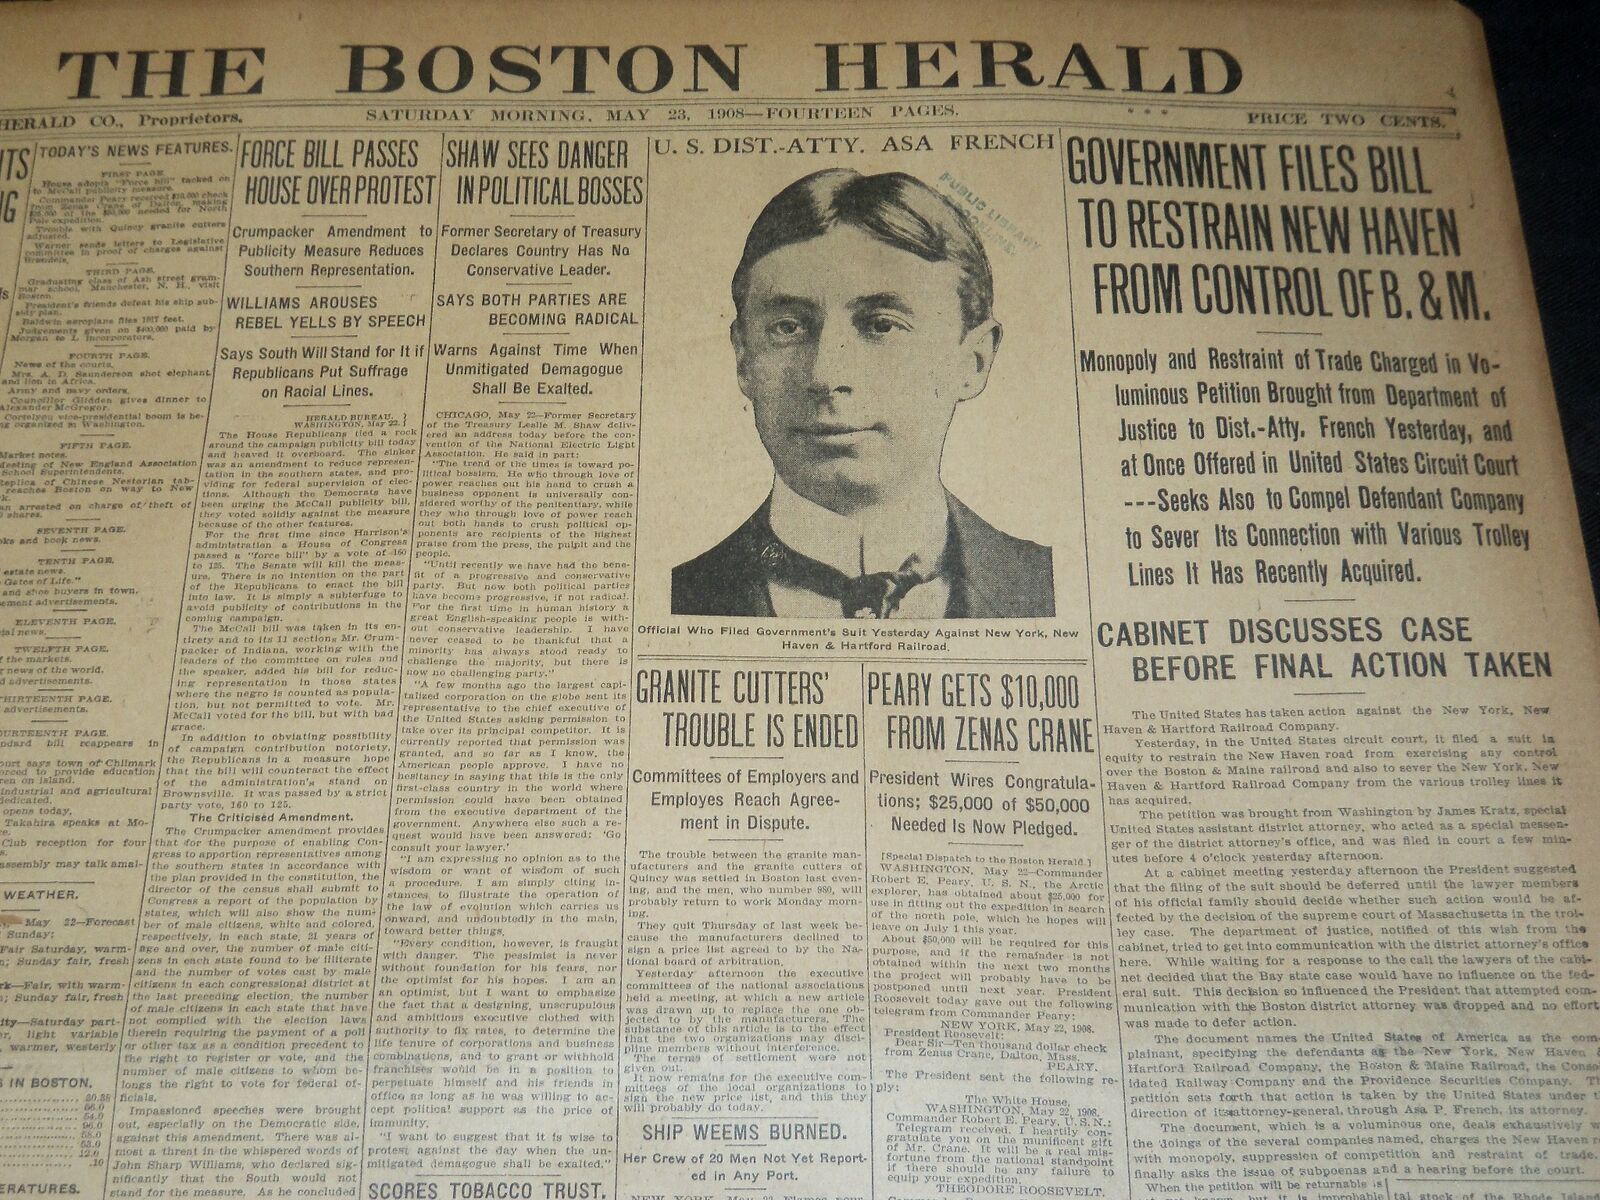 1908 MAY 23 THE BOSTON HERALD - BILL TO RESTRAIN NEW HAVEN FROM B & M - BH 73